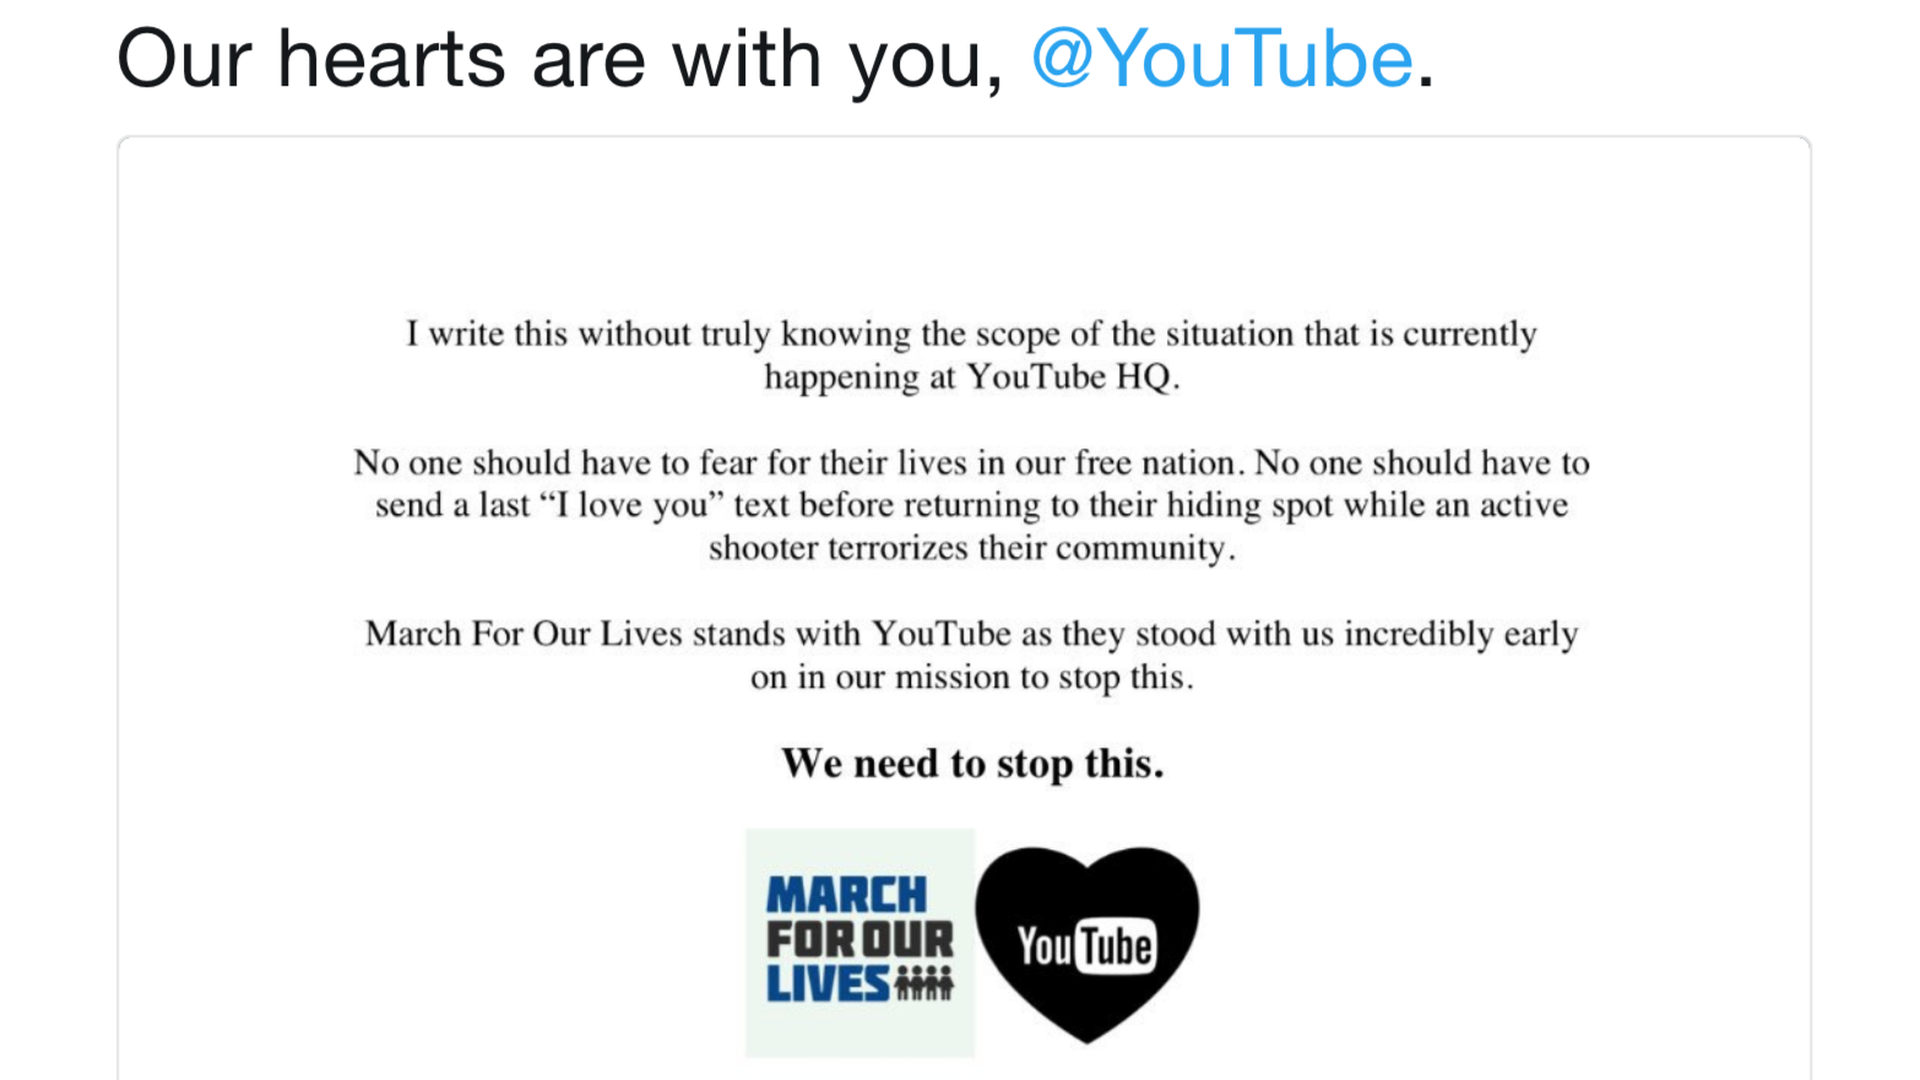 A tweet from March for our Lives organizers showing solidarity after the shooting at YouTube